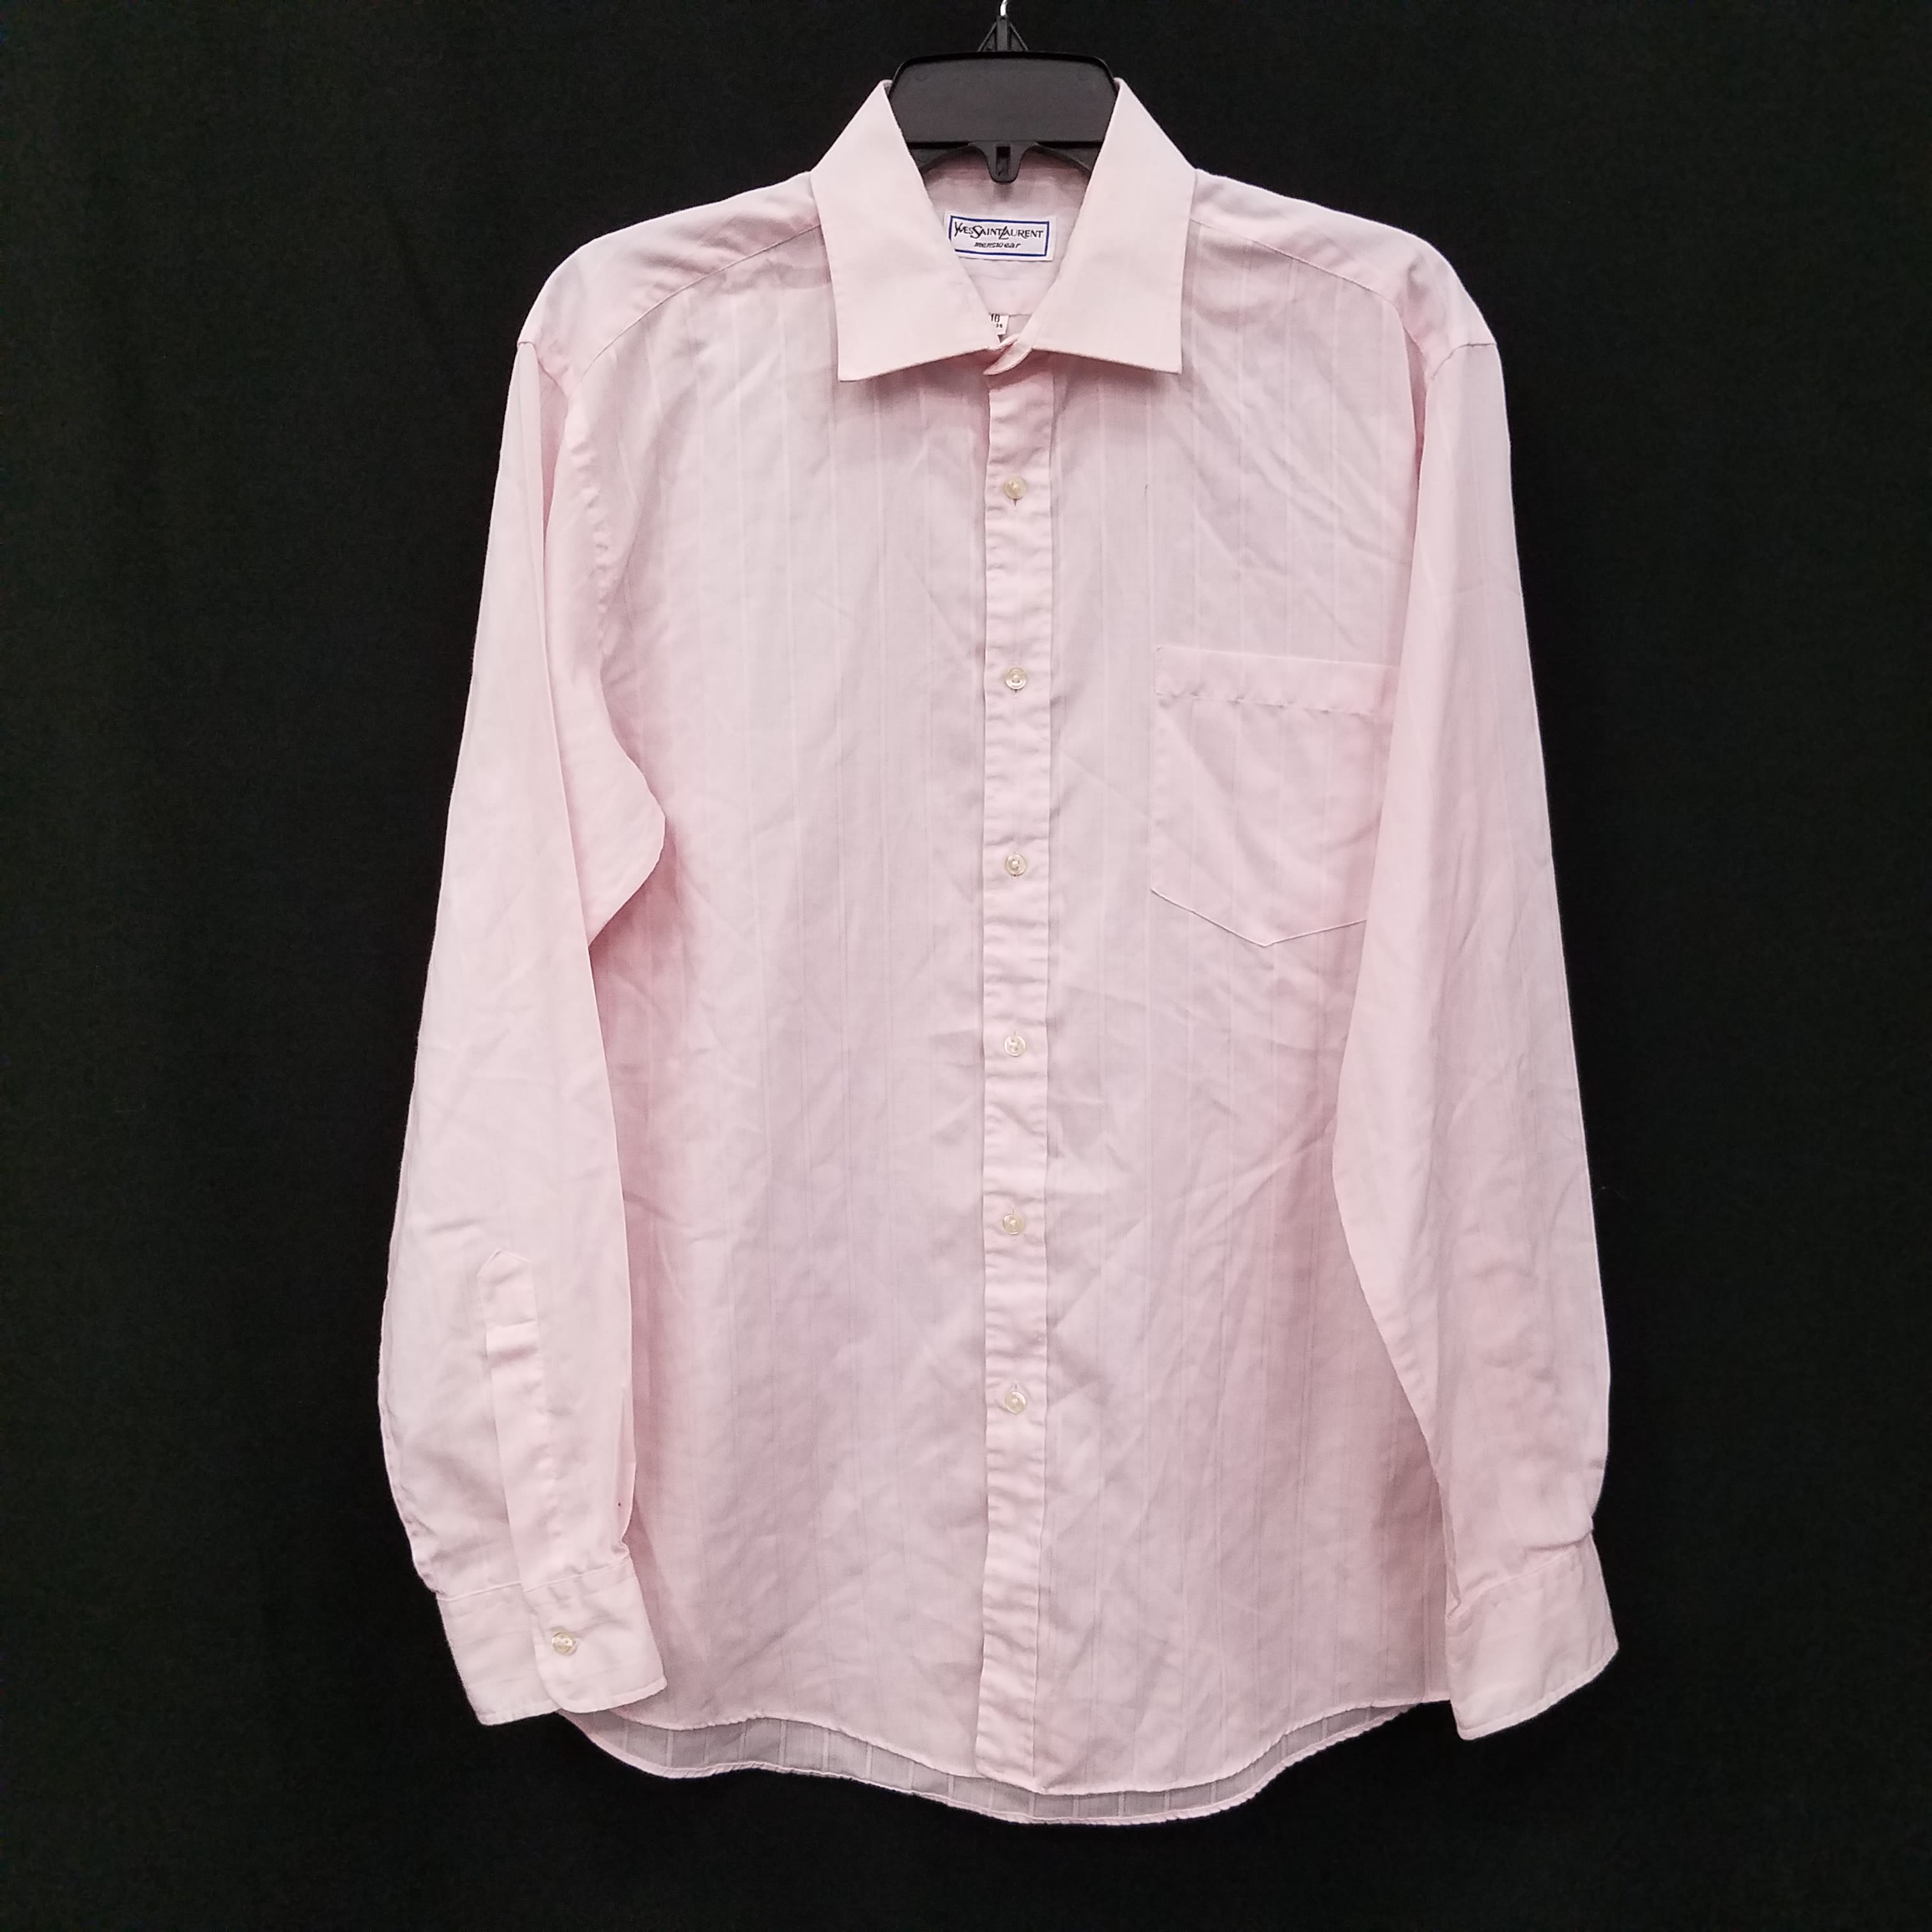 Buy the Mens Pink Collared Long Sleeve Button Front Dress Shirt Size 16 ...